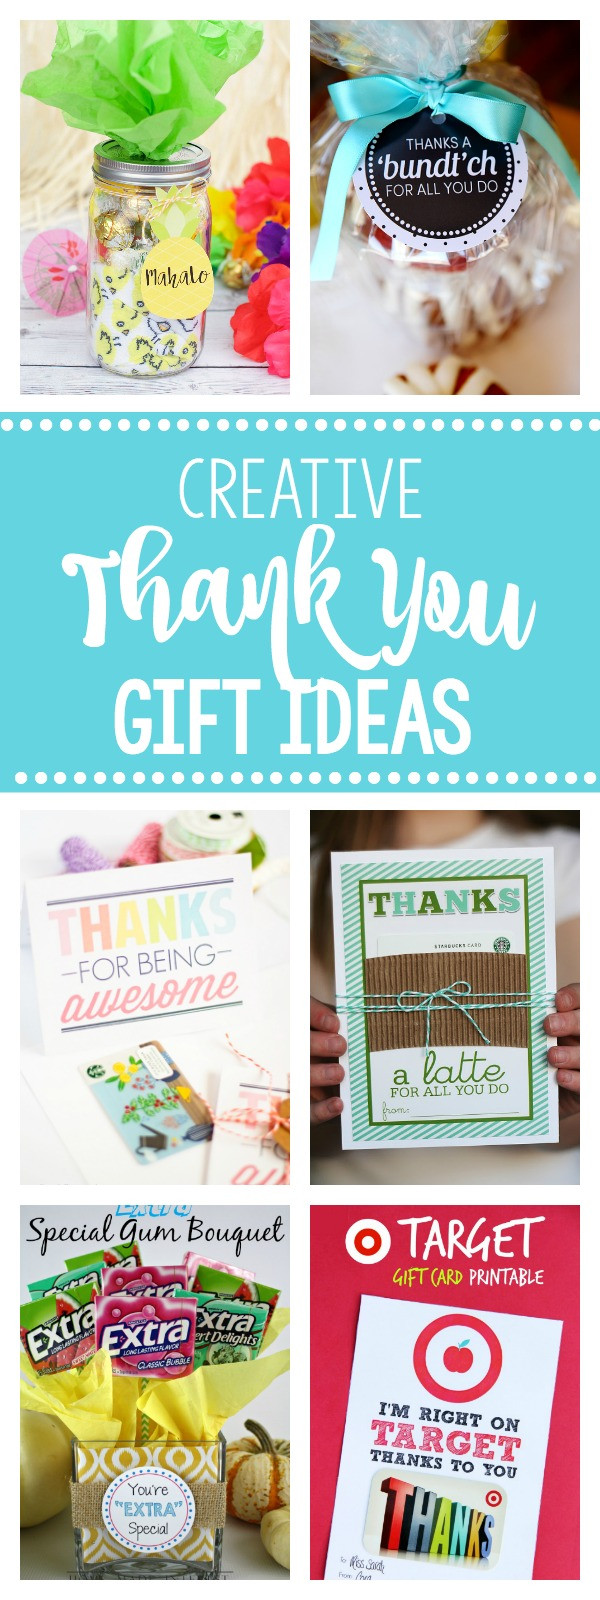 Thank You For Your Time Gift Ideas
 25 Creative & Unique Thank You Gifts – Fun Squared